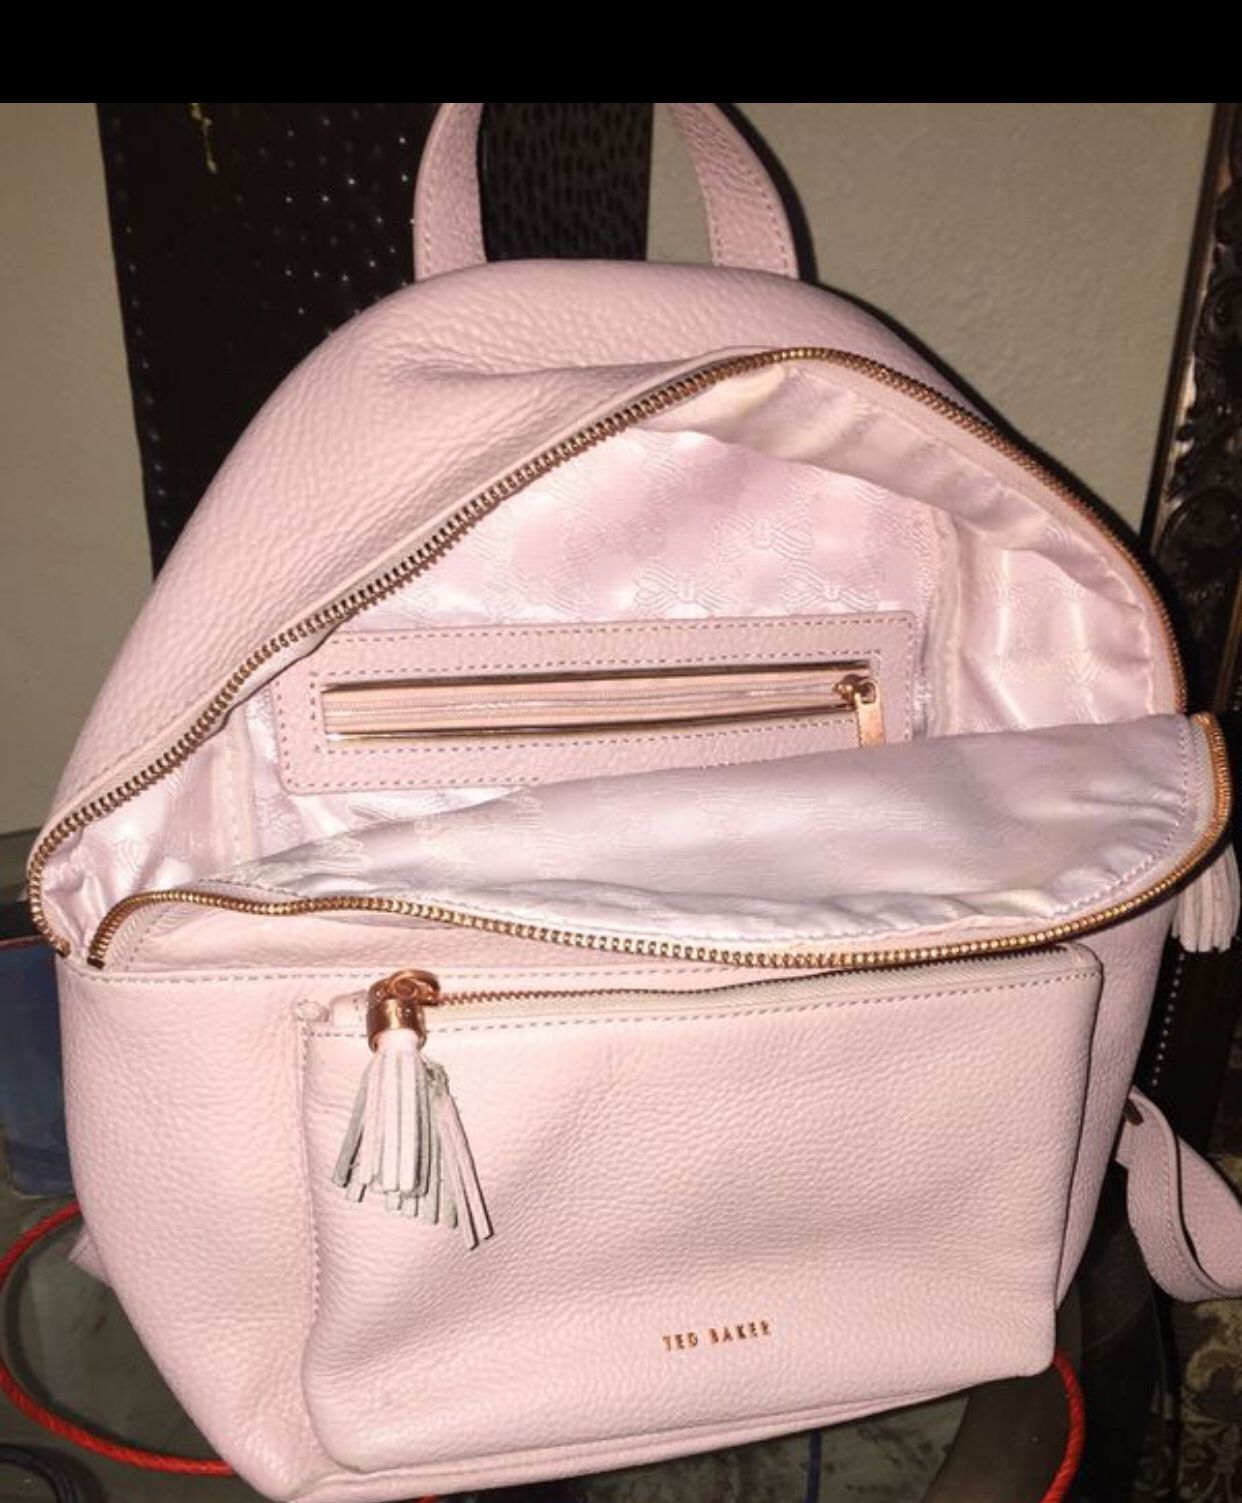 Ted Baker backpack Pink nude used